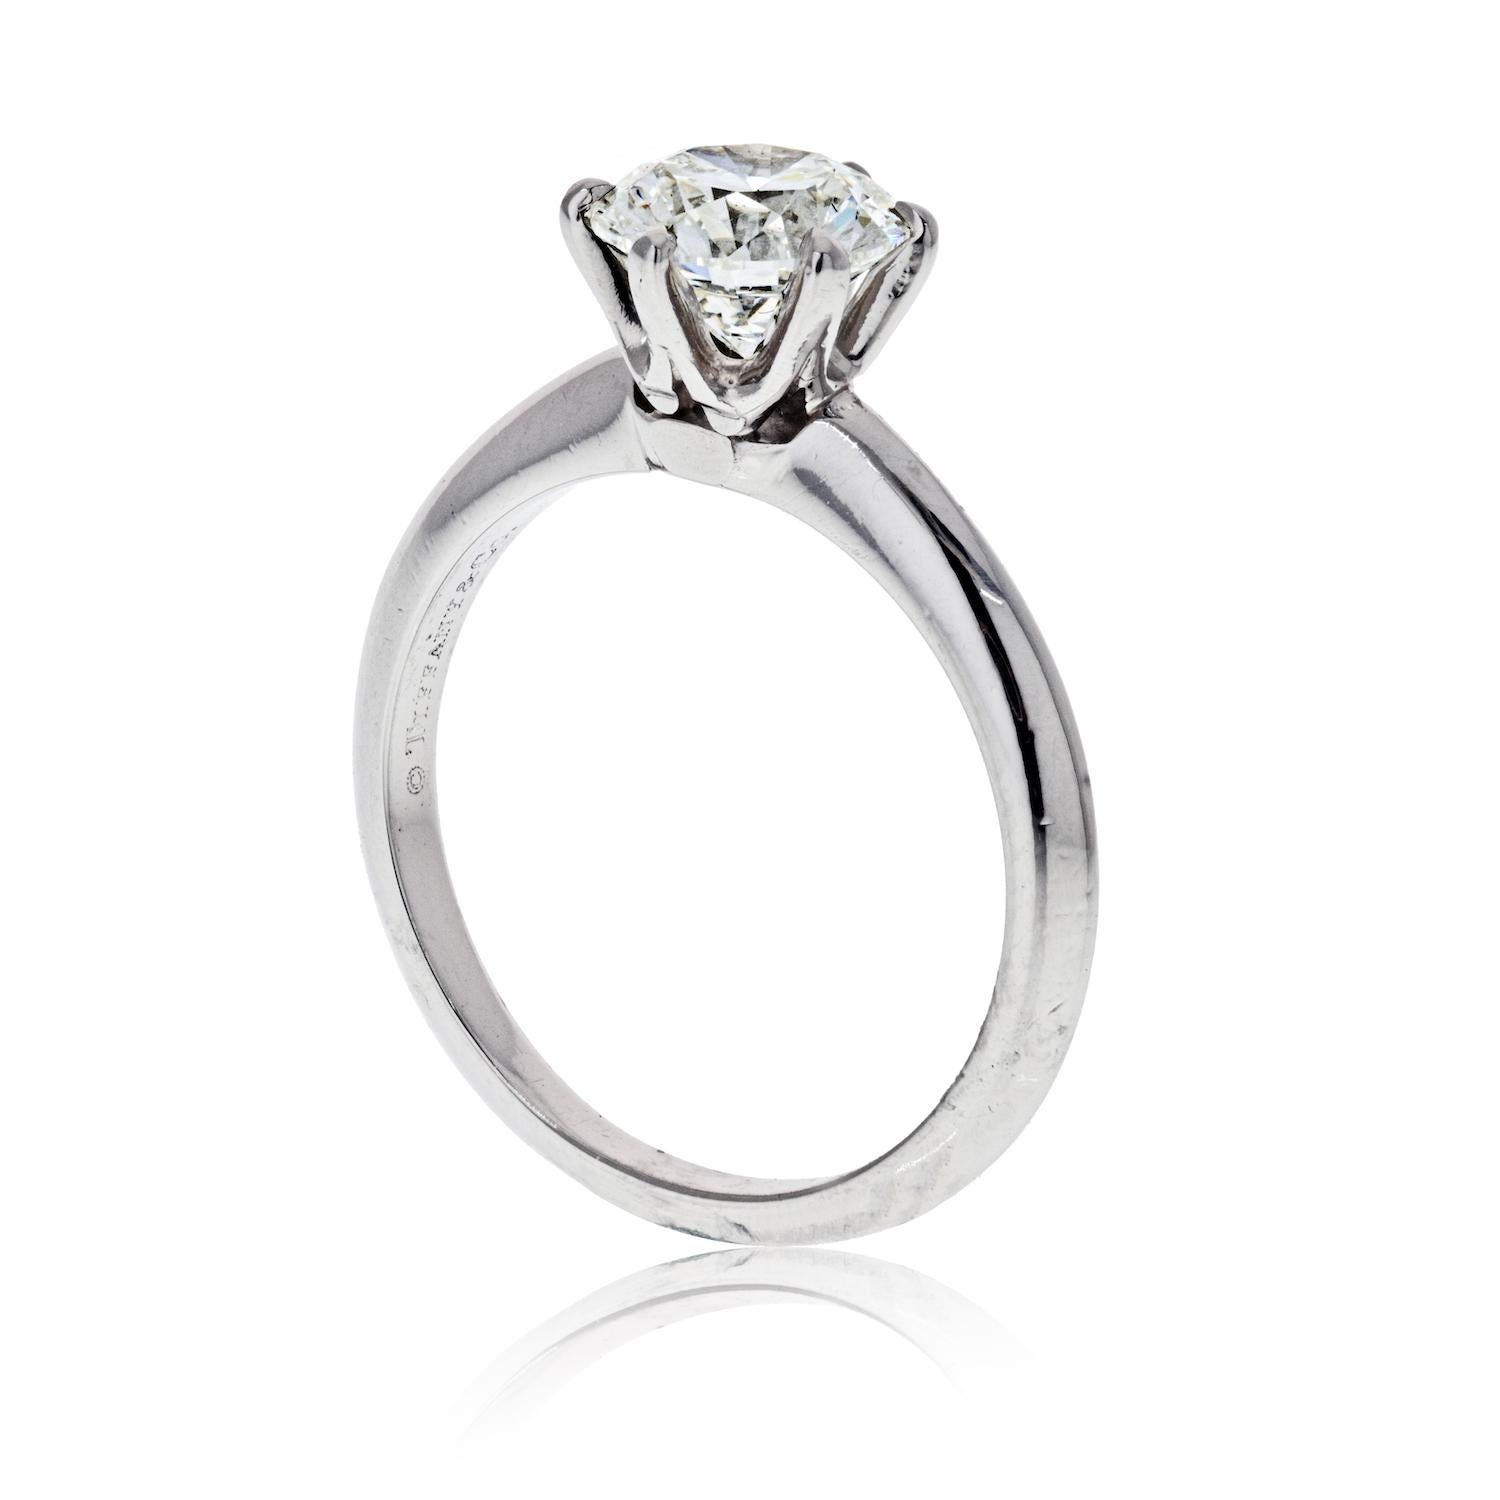 Introduced in 1886, the Tiffany Six Prong Setting is the most popular diamond engagement ring in history. The most iconic engagement ring design, the Tiffany 6 Prong Setting features a round brilliant-cut diamond in a six-prong setting, lifting the